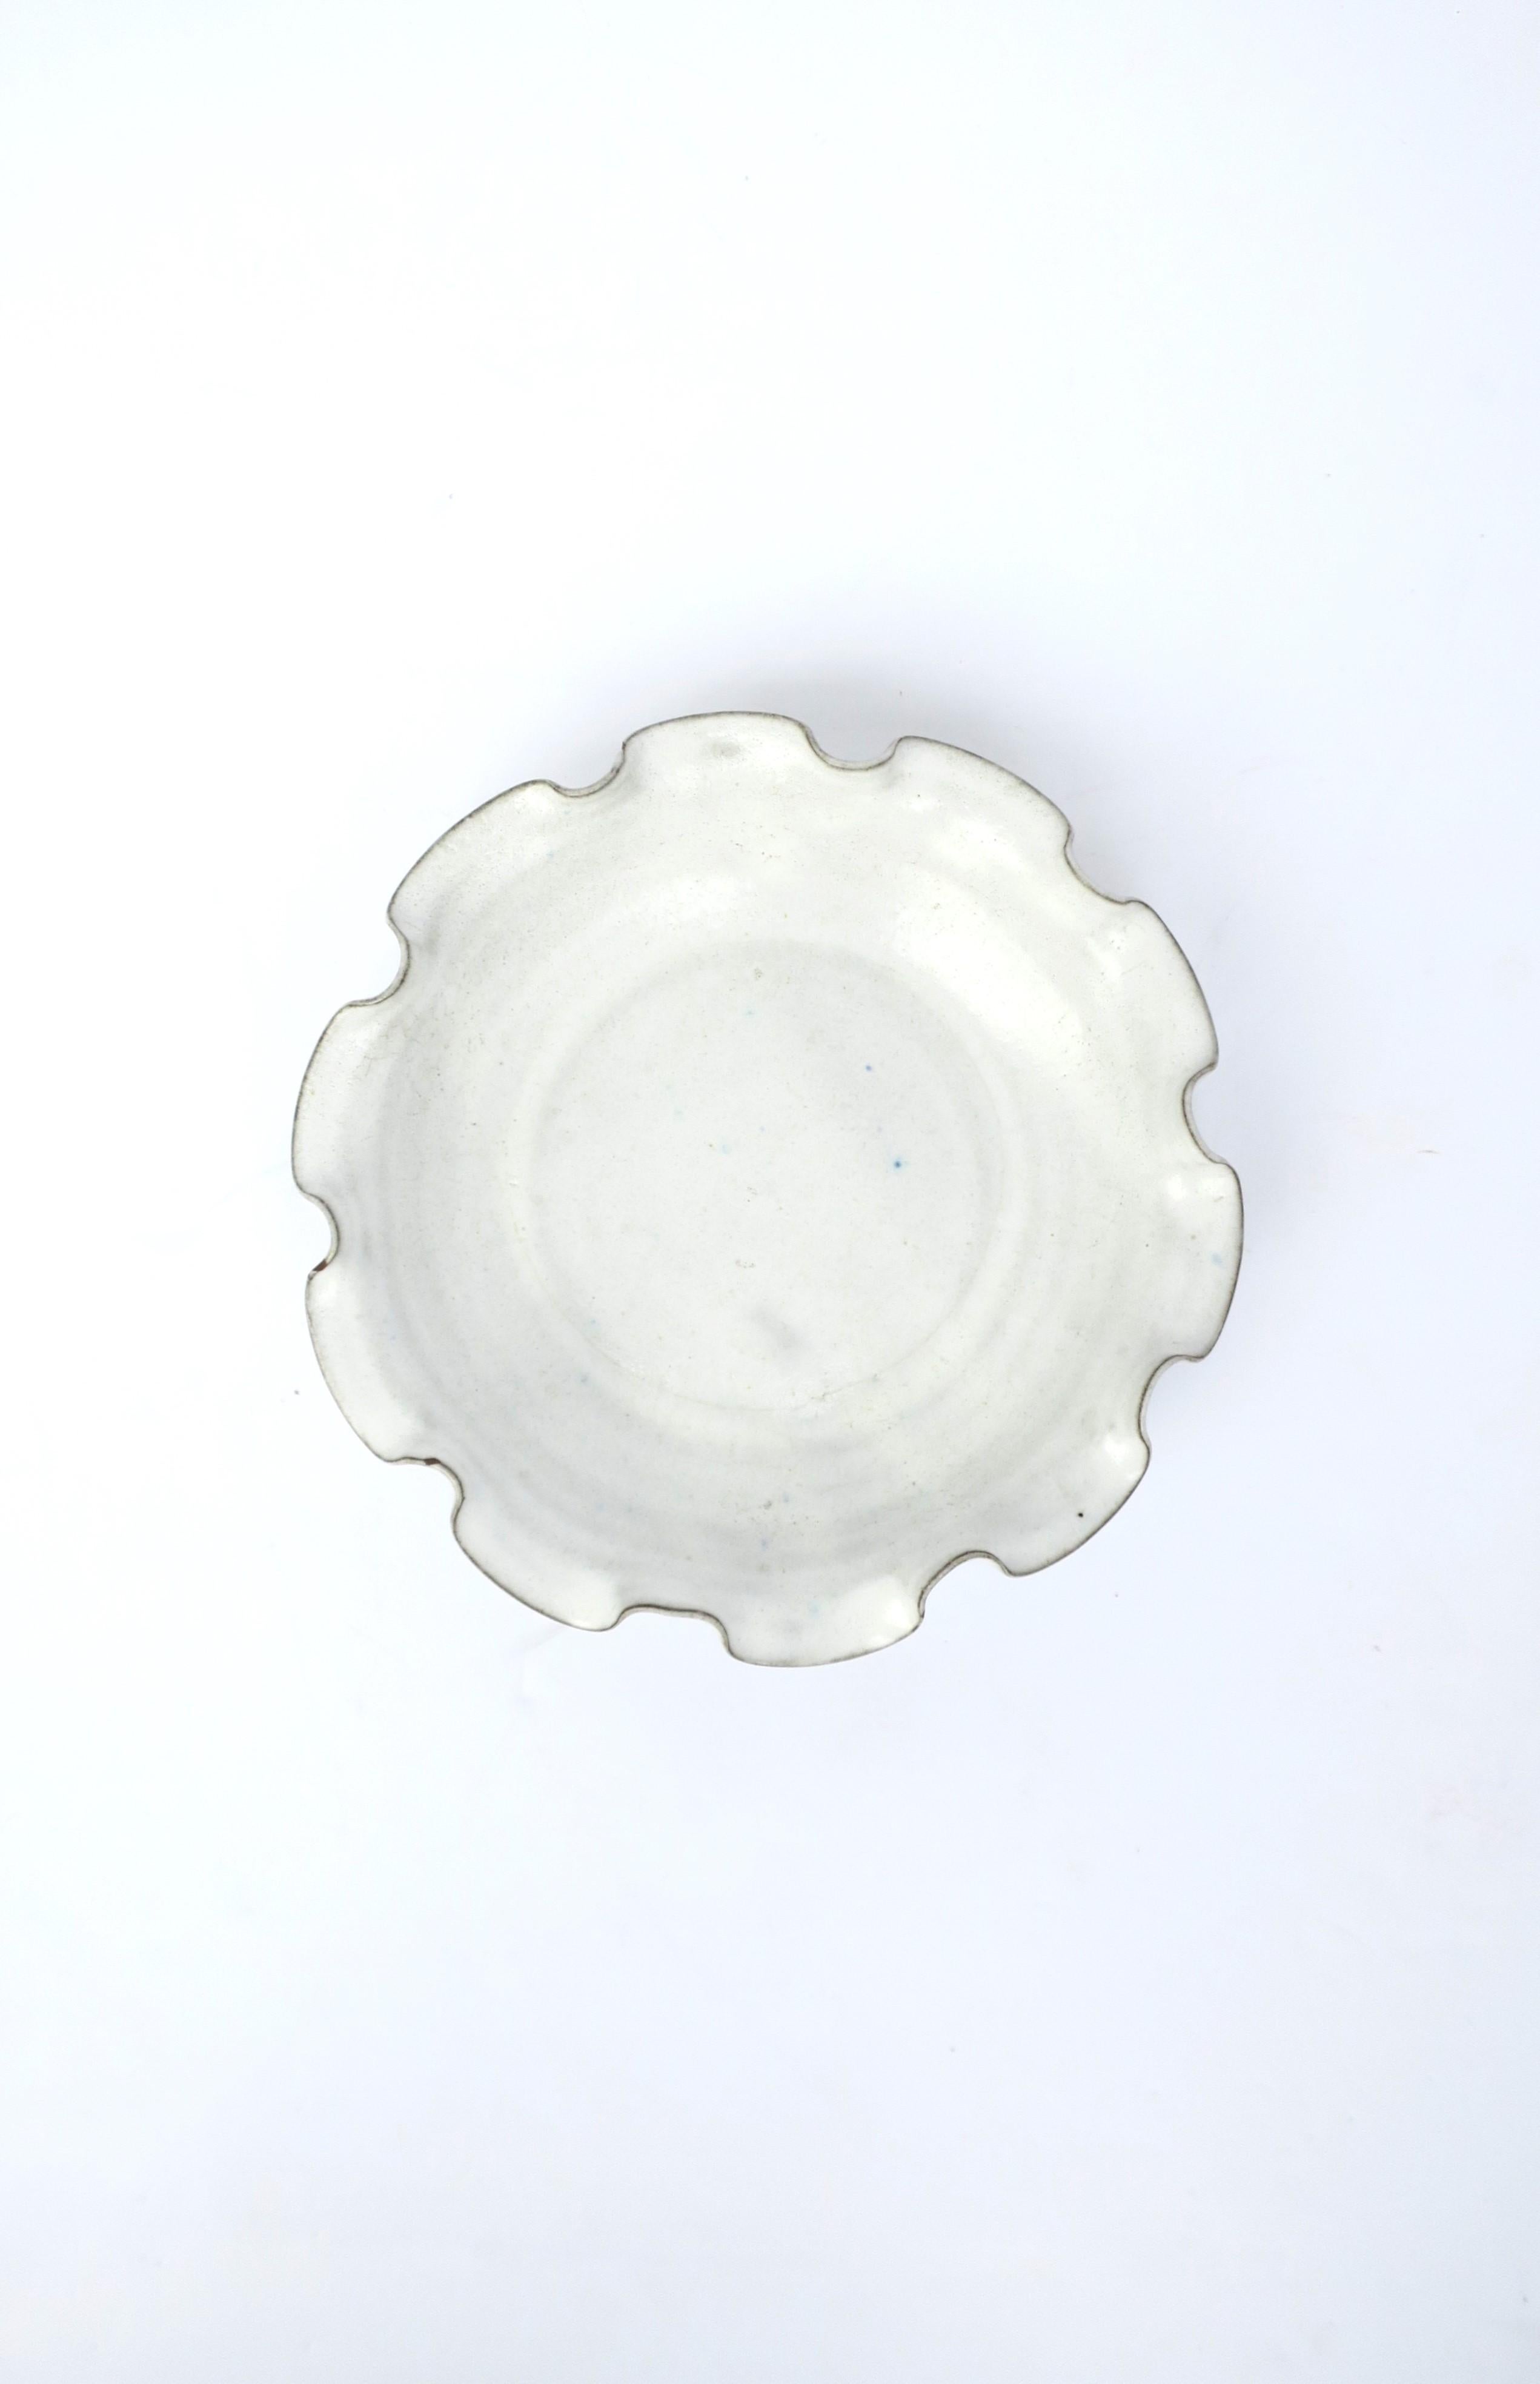 A beautiful white pottery bowl with ruffled edge. Great as a standalone piece, as a catch-all, or serving bowl. Dimensions: 8.75